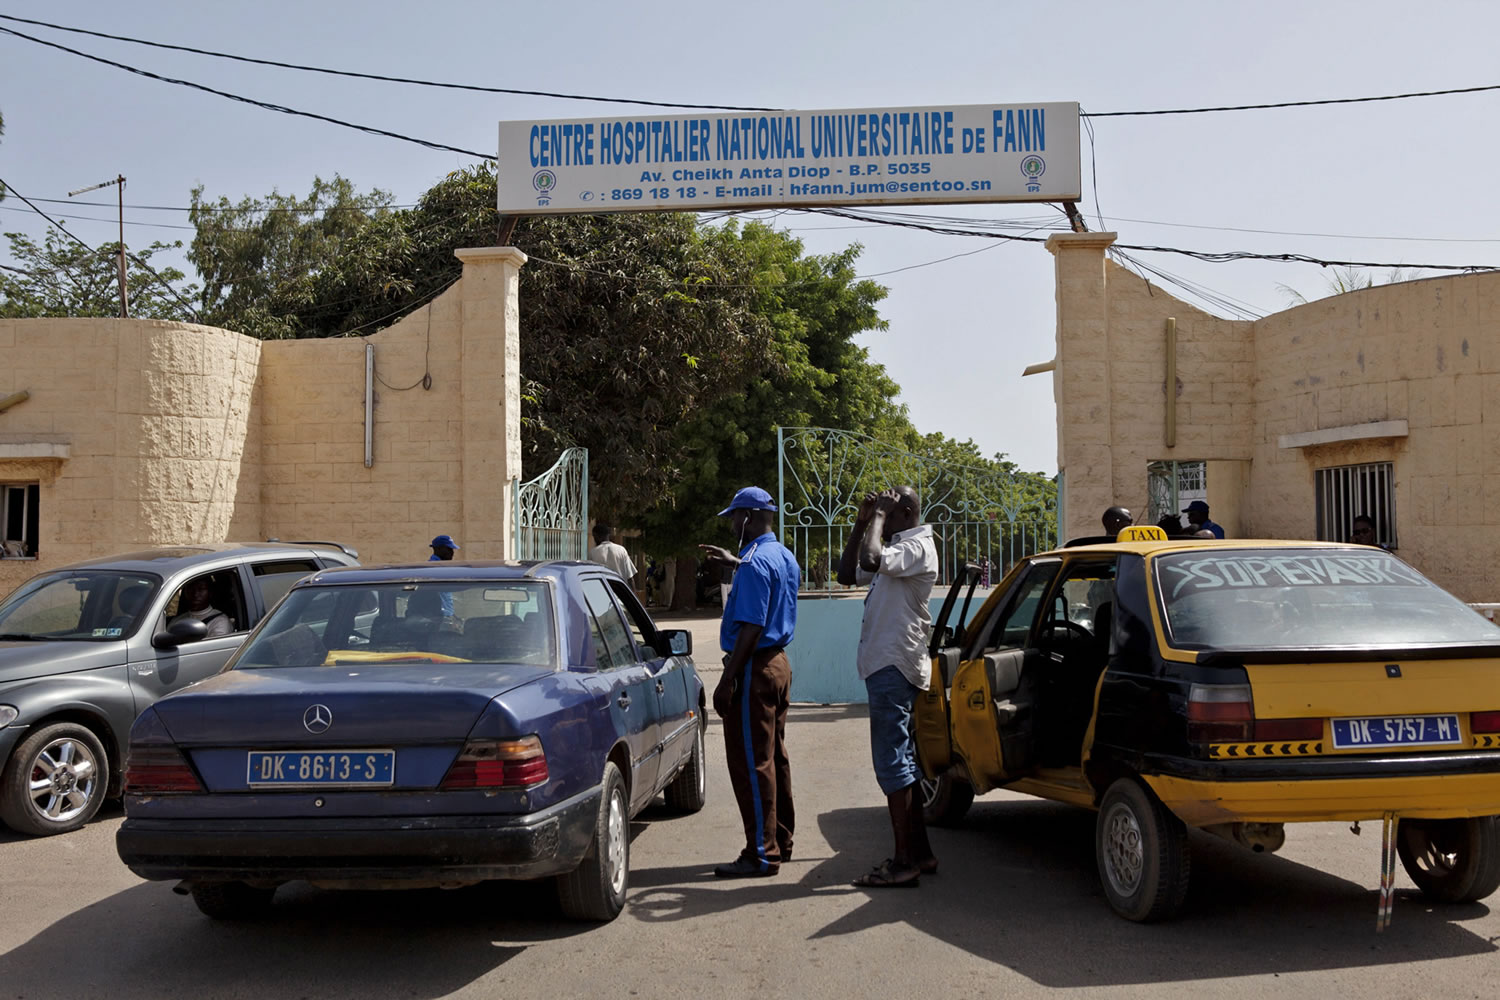 A security guard, center left, working at the University Hospital Fann, speaks to people inside a car Friday, as a man is  treated for symptoms of the Ebola virus inside the Hospital in Dakar, Senegal. The effort to contain Ebola in Senegal is ?a top priority emergency,?